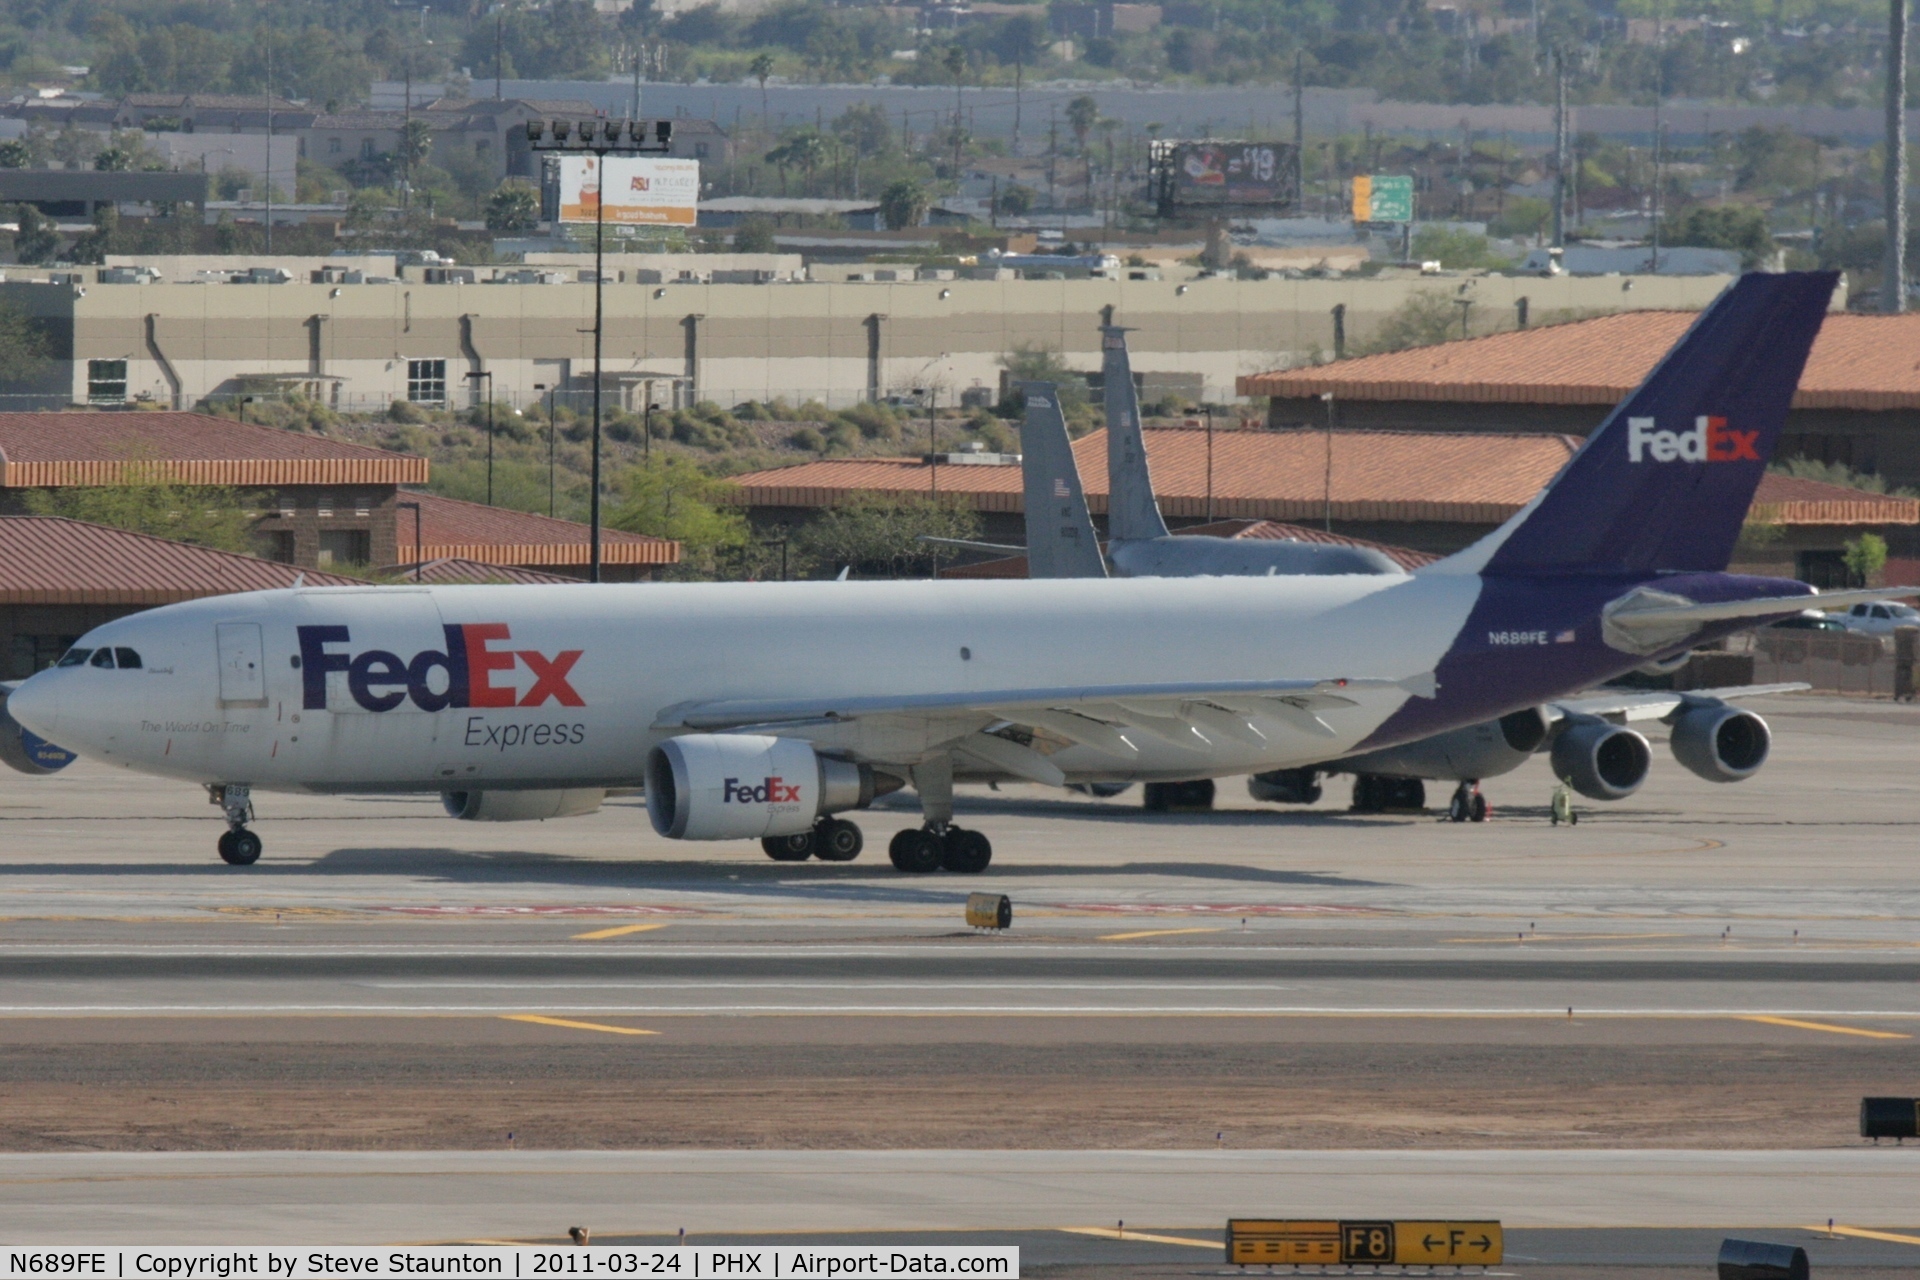 N689FE, 2007 Airbus A300F4-605R C/N 0875, Taken at Phoenix Sky Harbor Airport, in March 2011 whilst on an Aeroprint Aviation tour